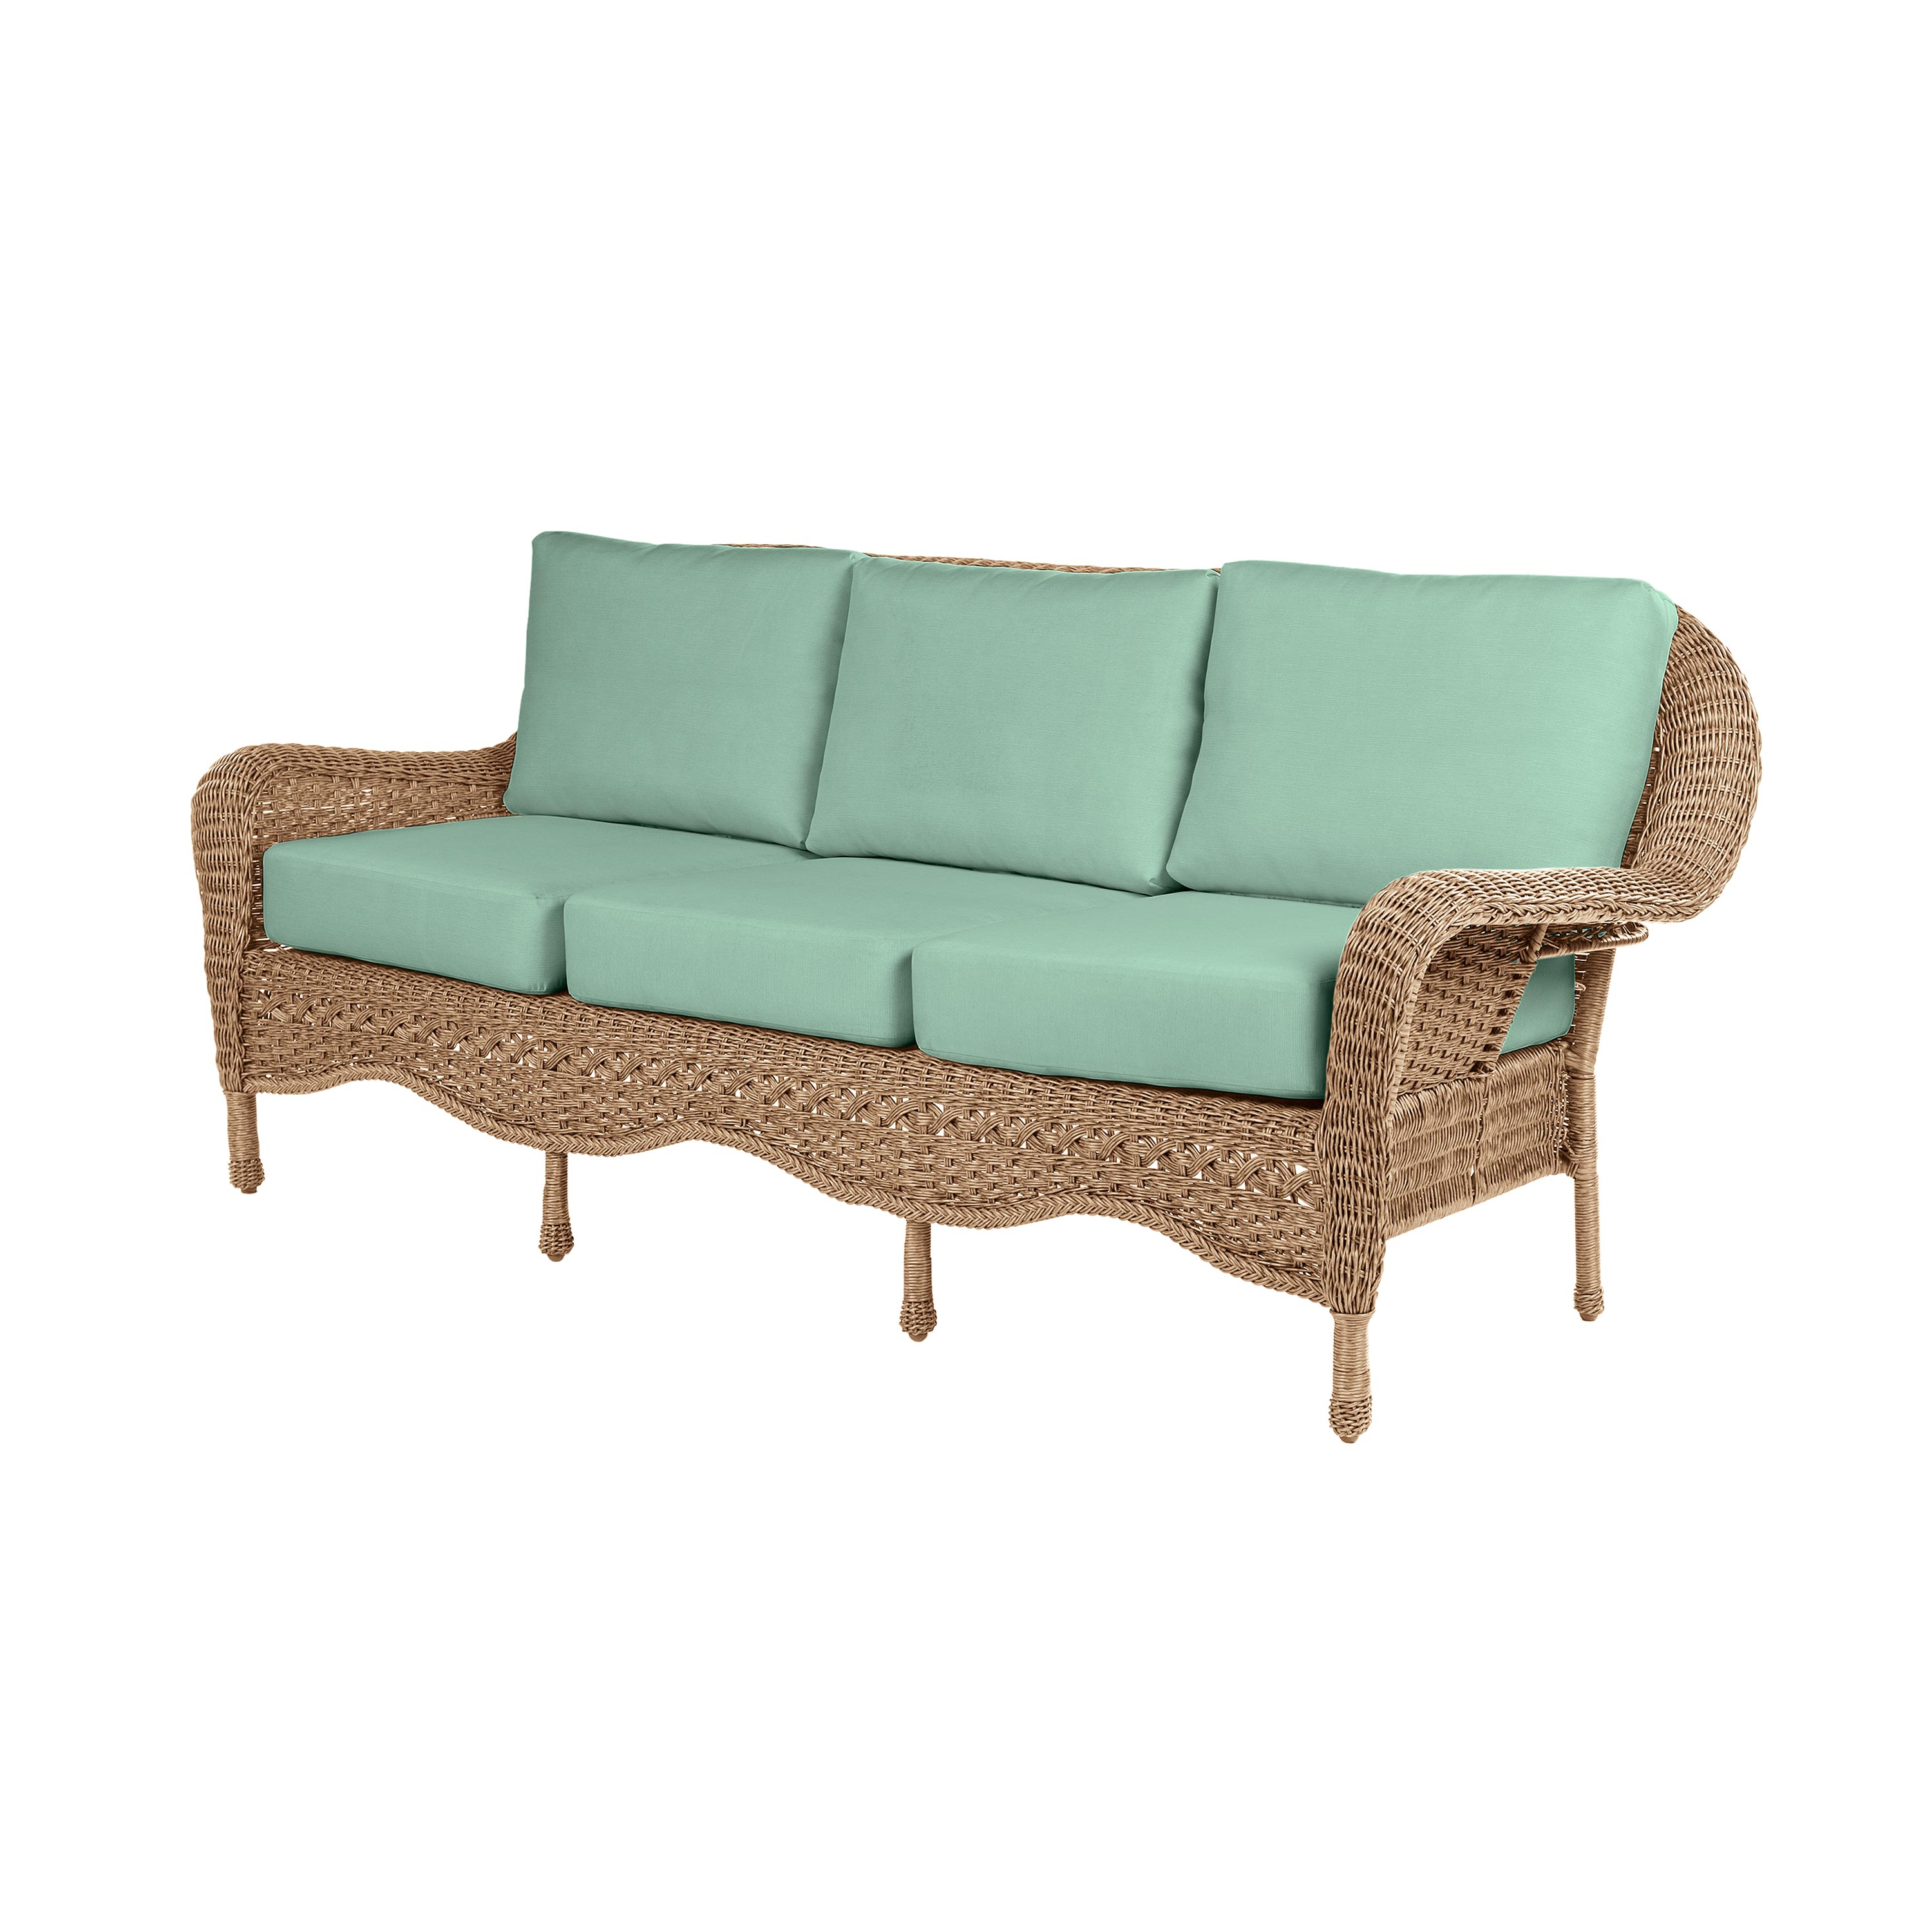 Prospect Hill Outdoor Wicker Deep Seating Sofa with Cushions swatch image